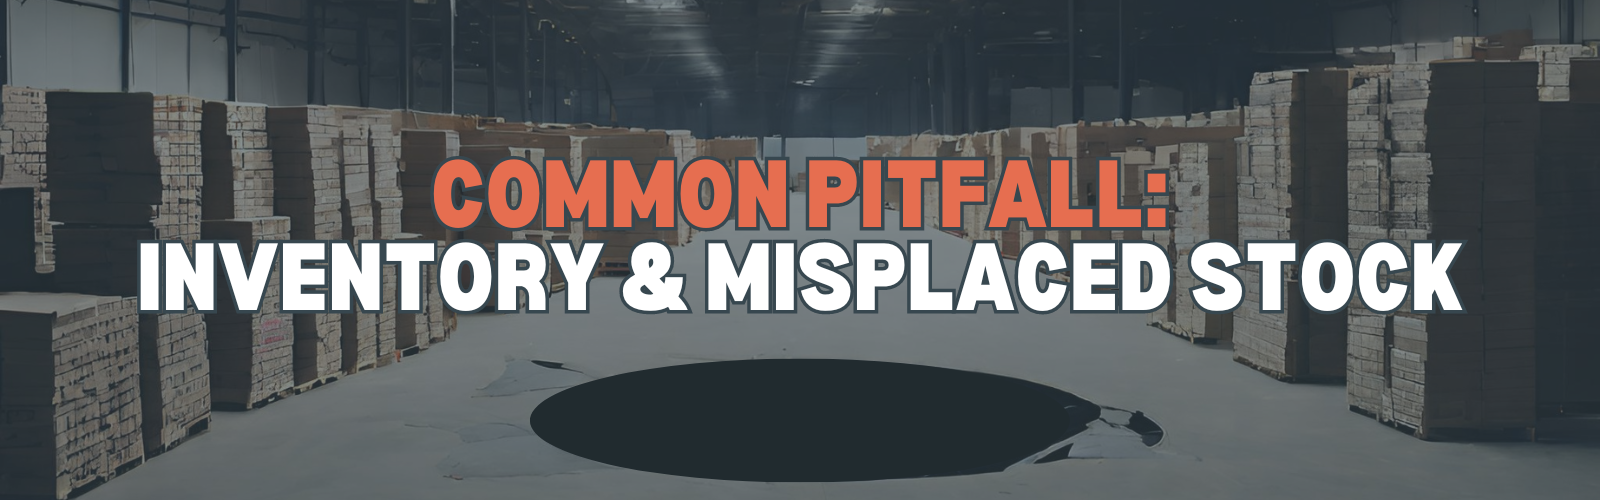 Amazon FBA - Common Pitfall - Complex Inventory and Misplaced Stock